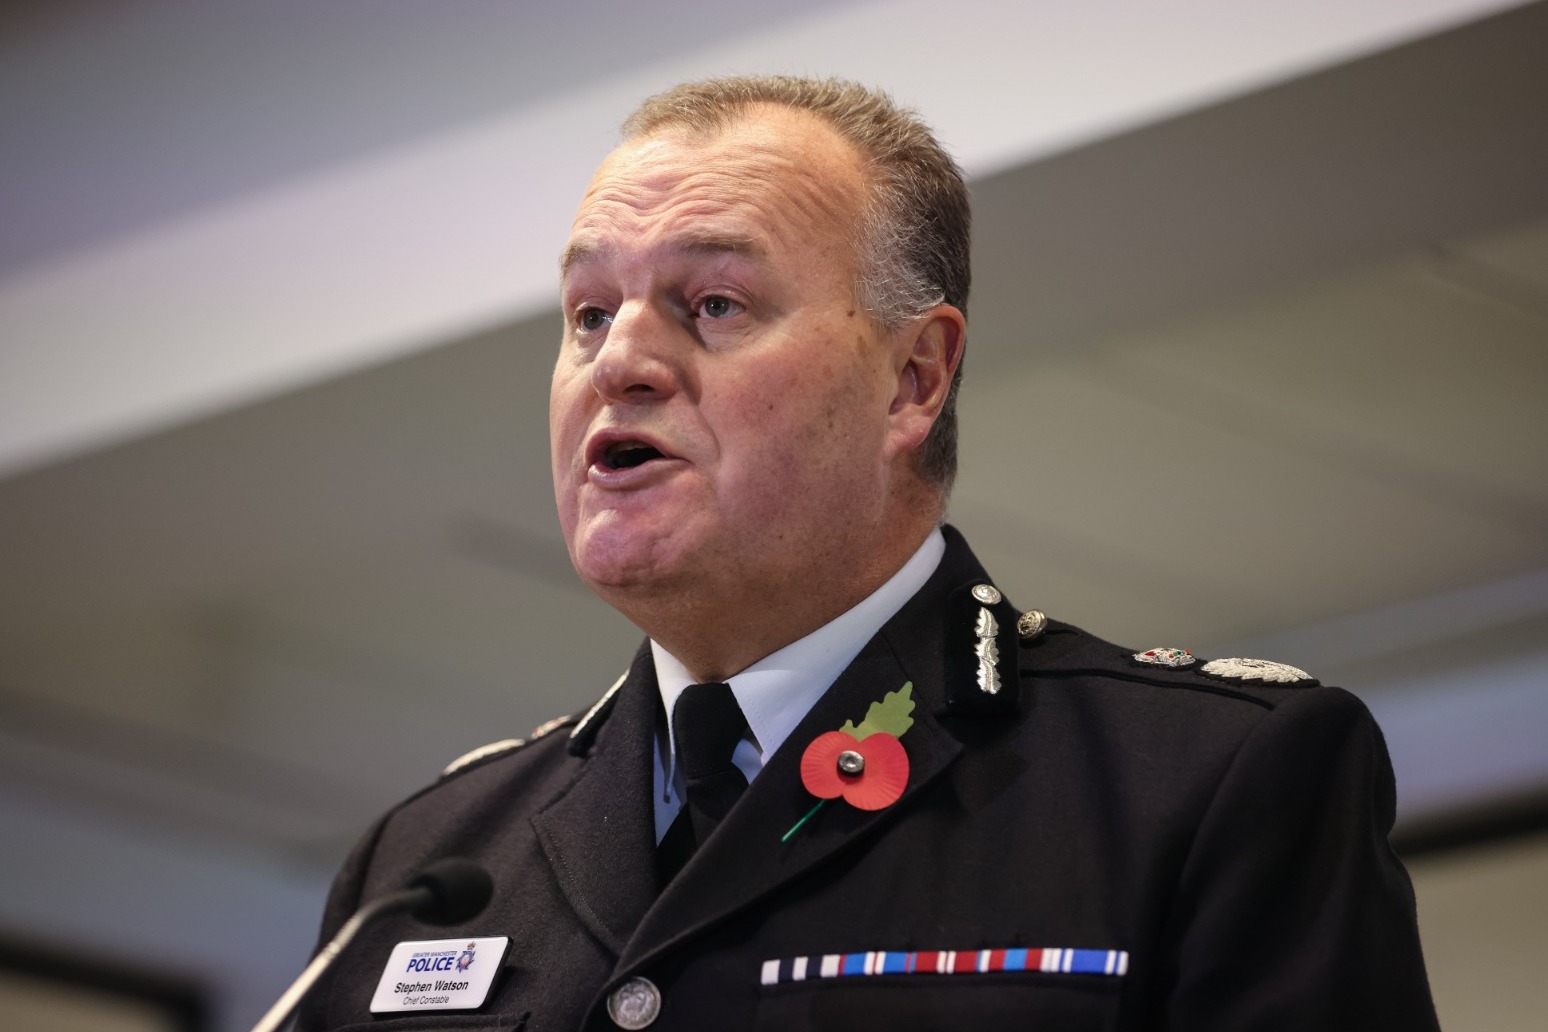 Significant improvements by Greater Manchester Police, inspection finds 